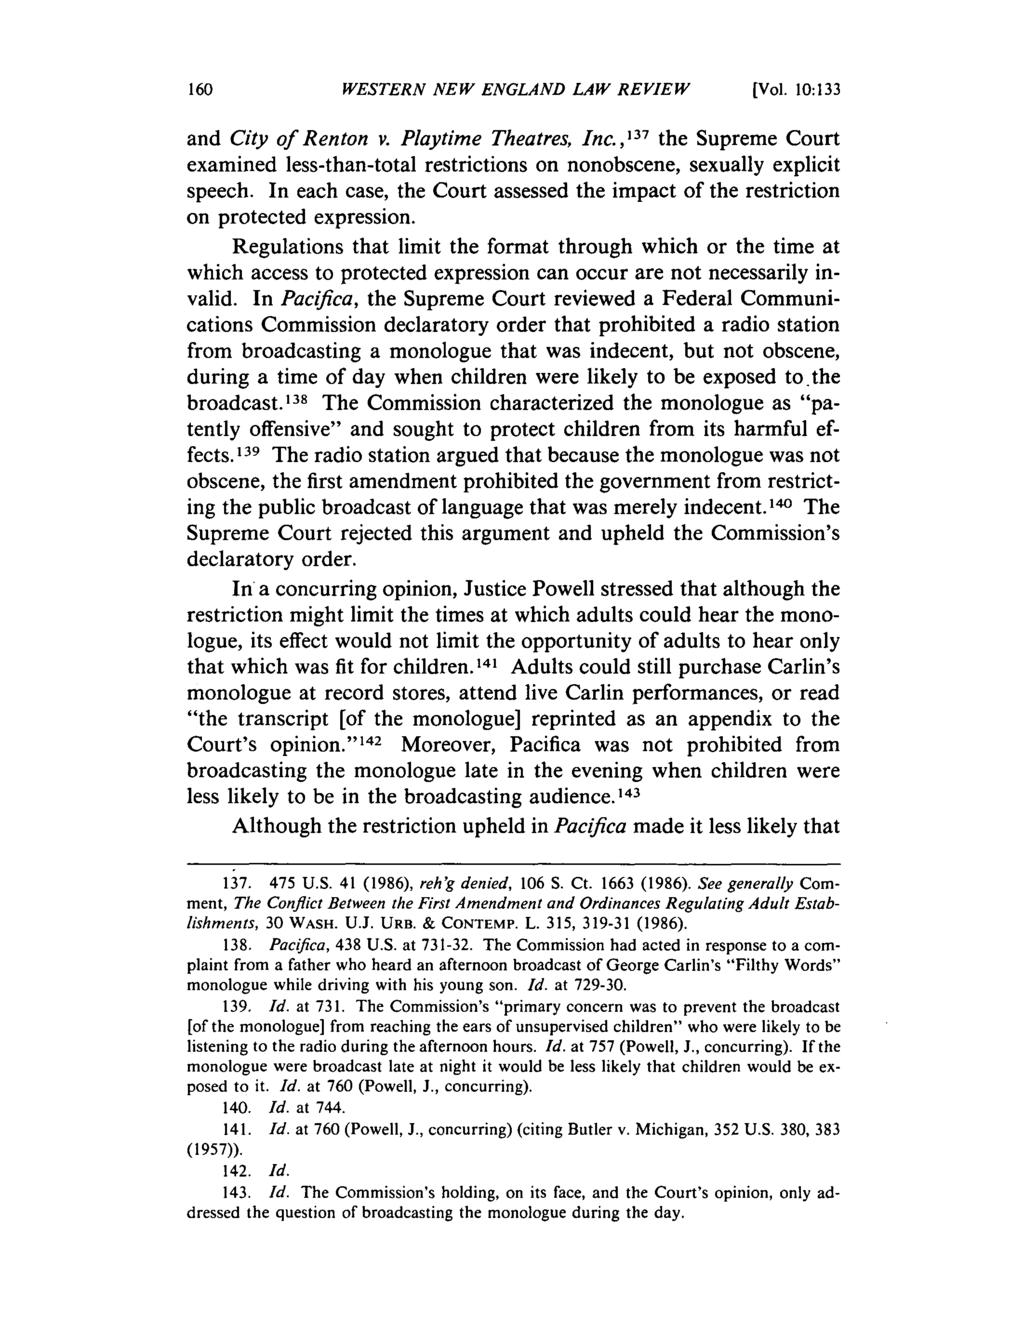 160 WESTERN NEW ENGLAND LAW REVIEW [Vol. 10:133 and City of Renton v. Playtime Theatres, Inc., 137 the Supreme Court examined less-than-total restrictions on nonobscene, sexually explicit speech.